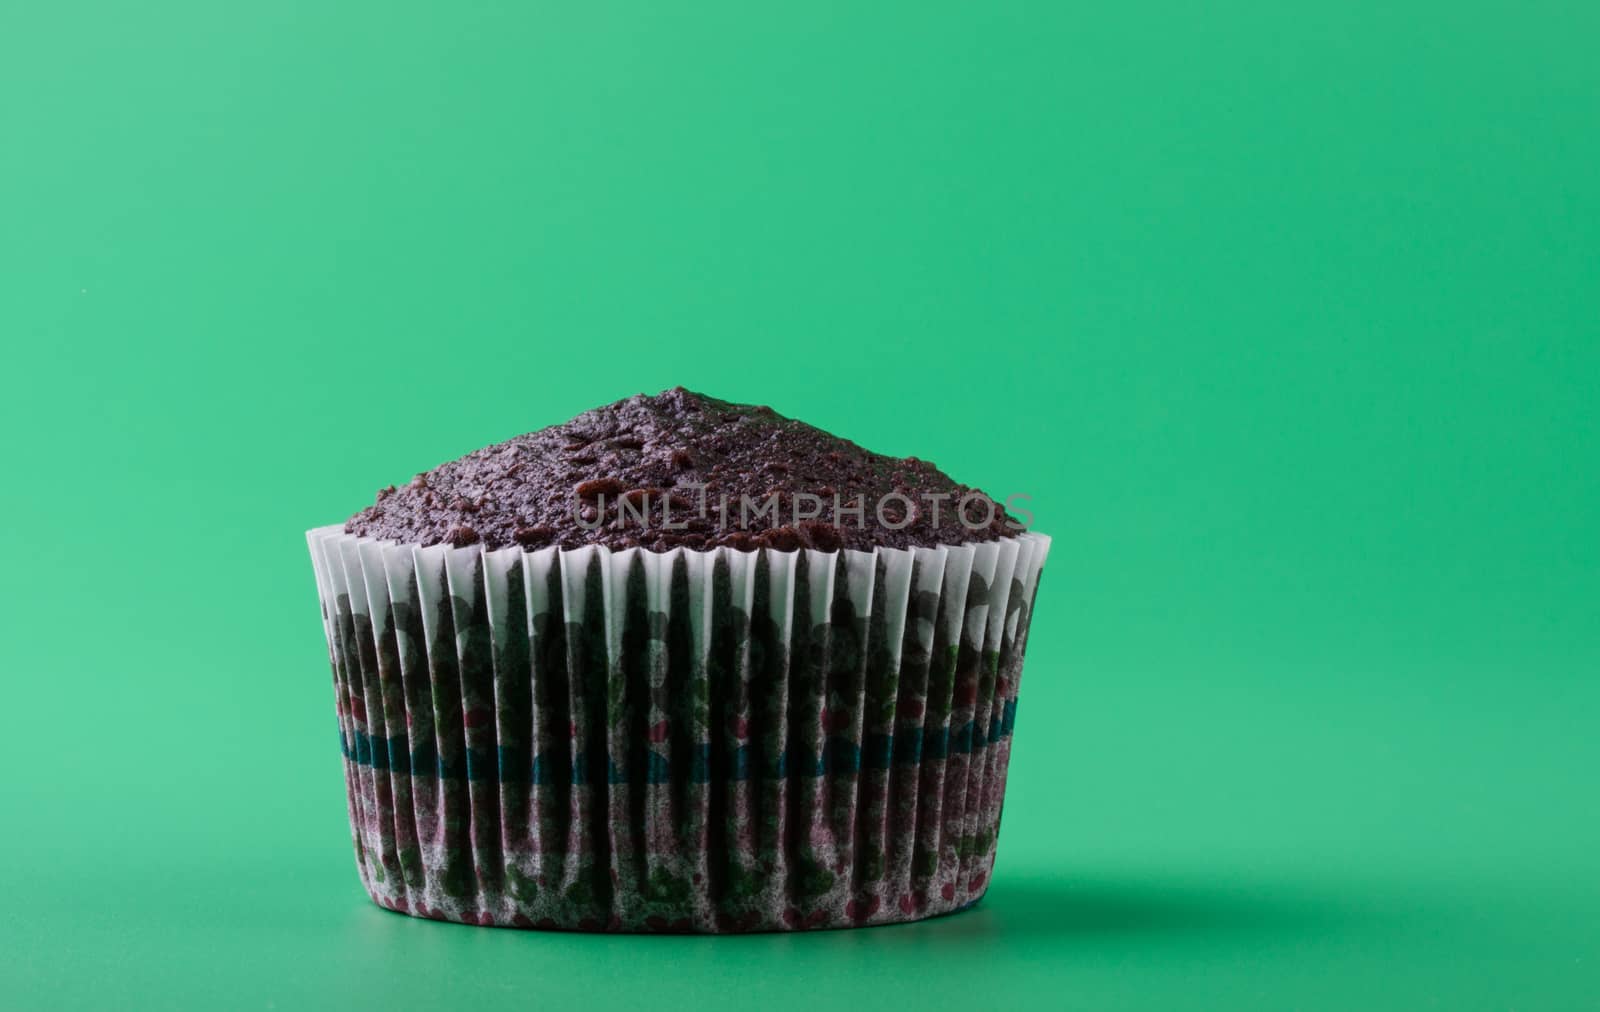 Delicious chocolate cupcake without icing, green background by lanalanglois